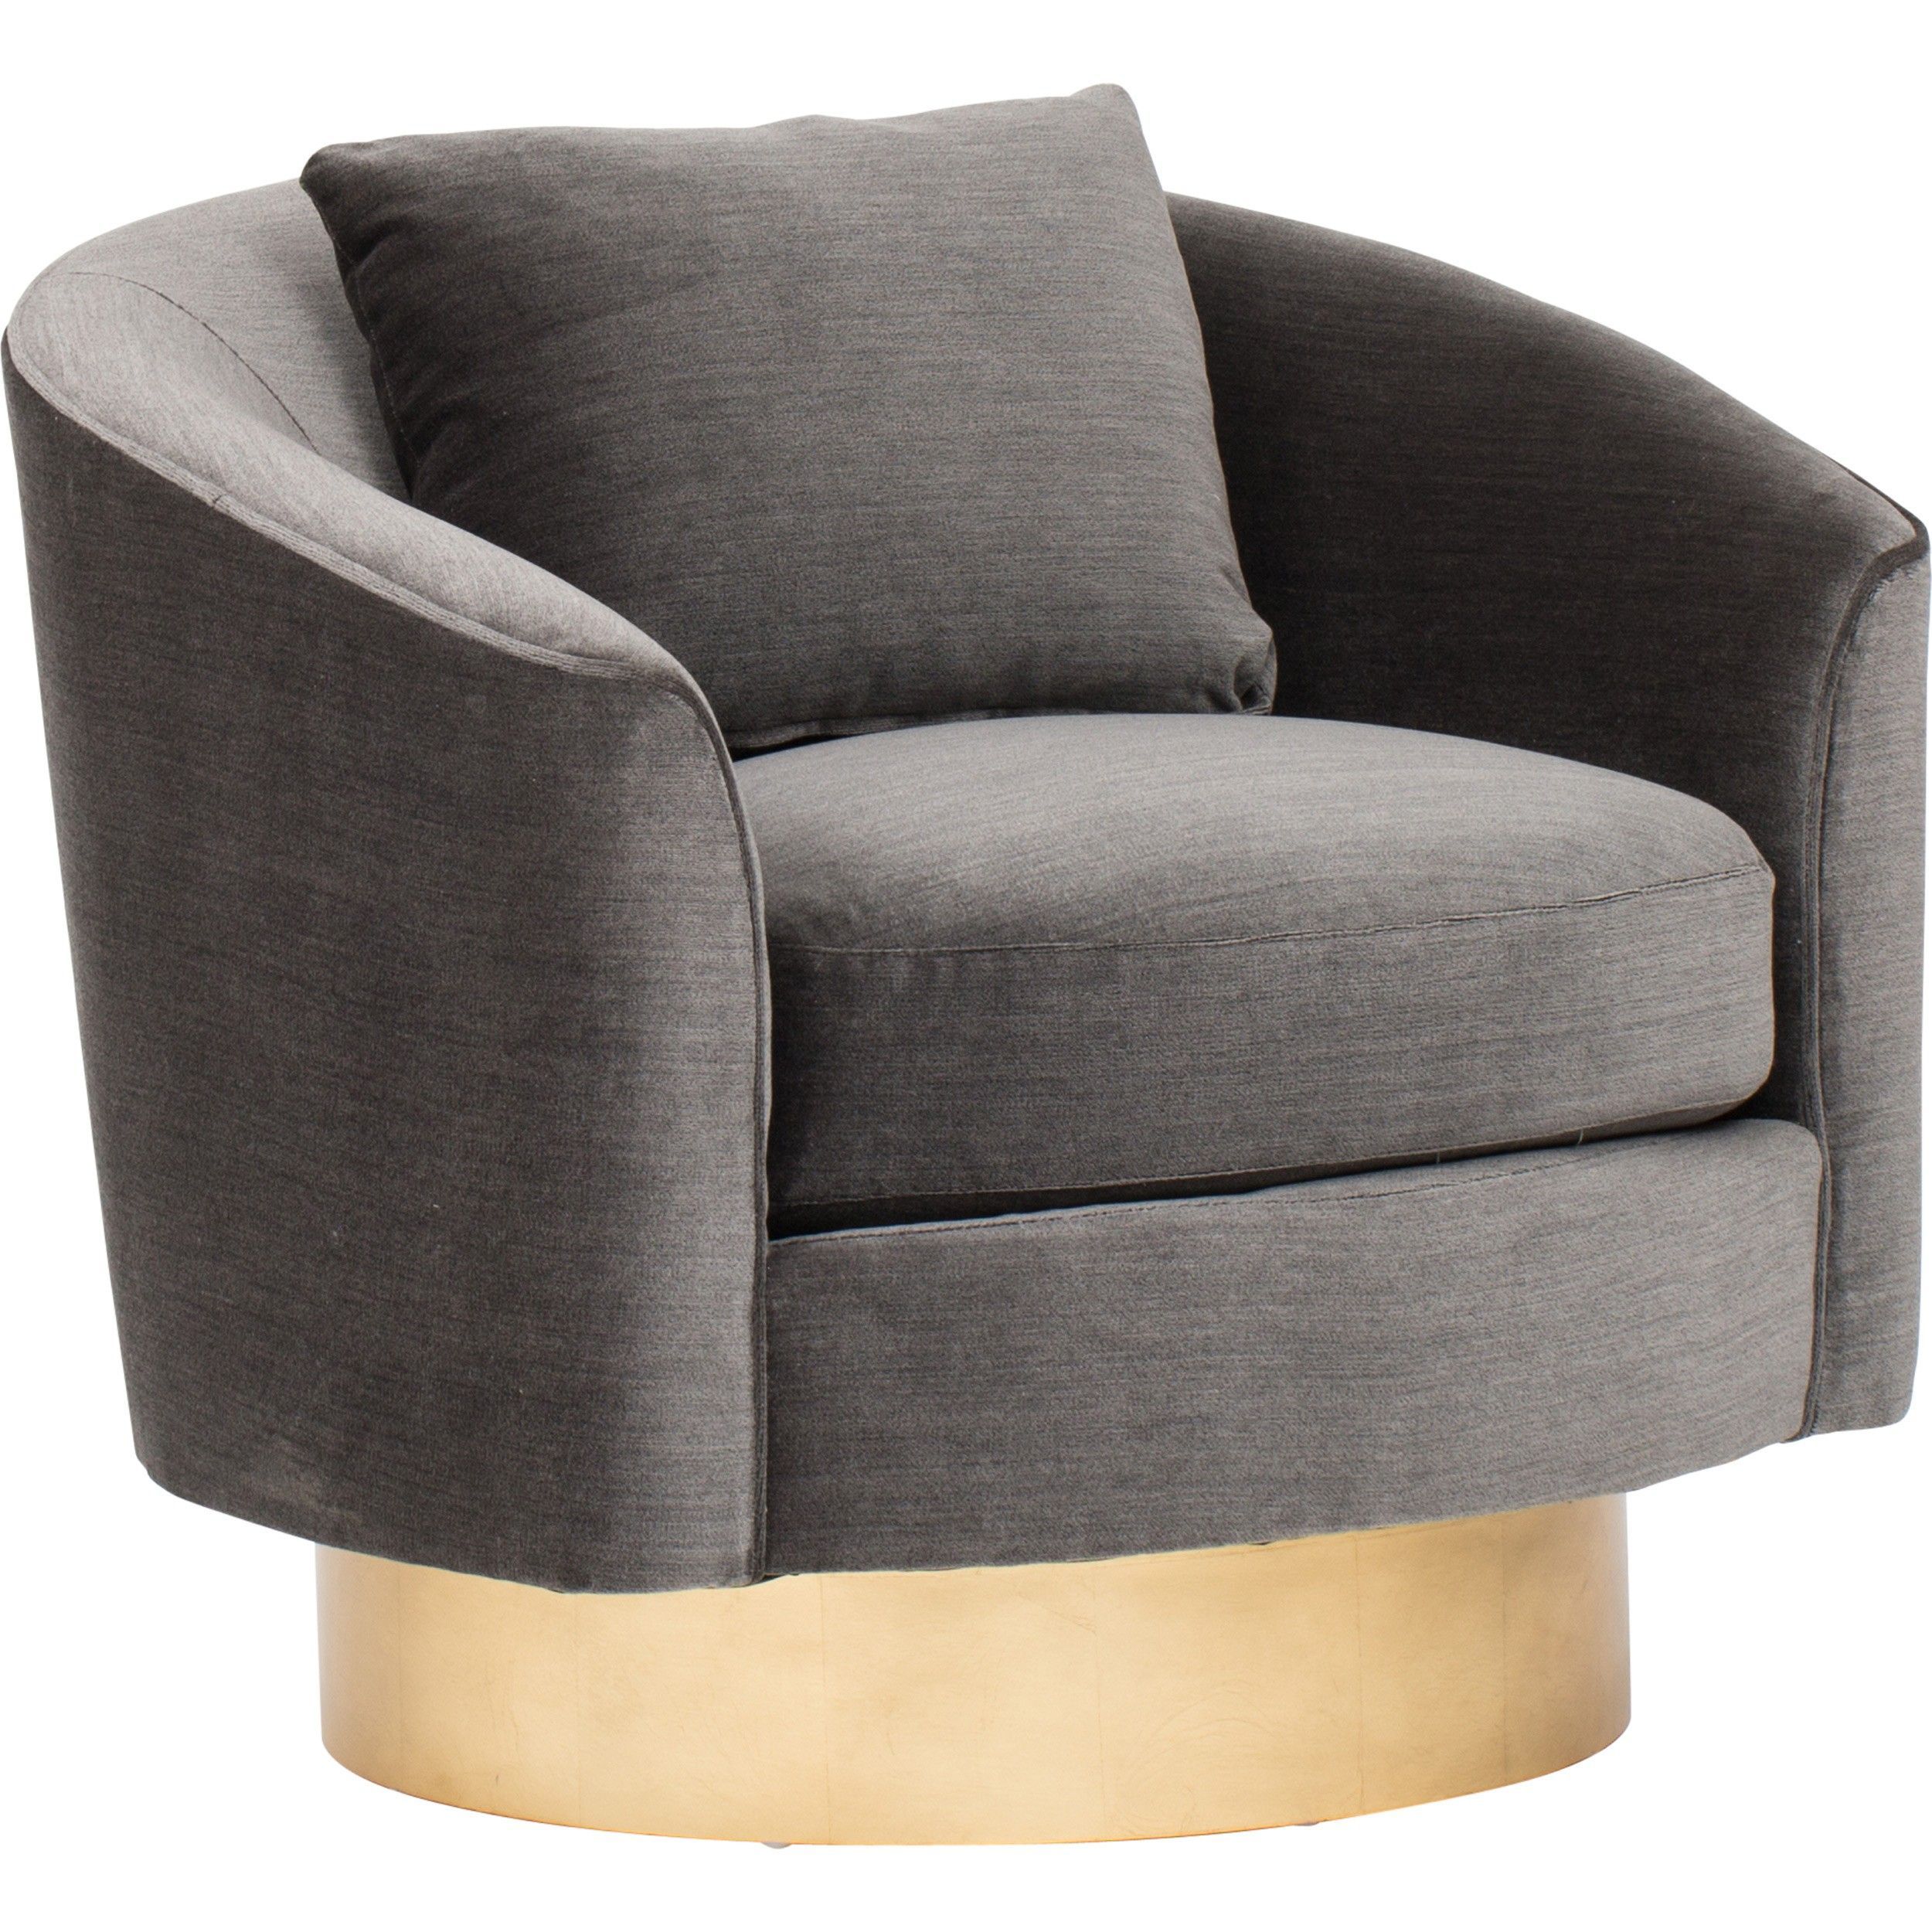 Camino Swivel Chair – Fabric – Chairs – Furniture | Modern For Filton Barrel Chairs (View 6 of 15)